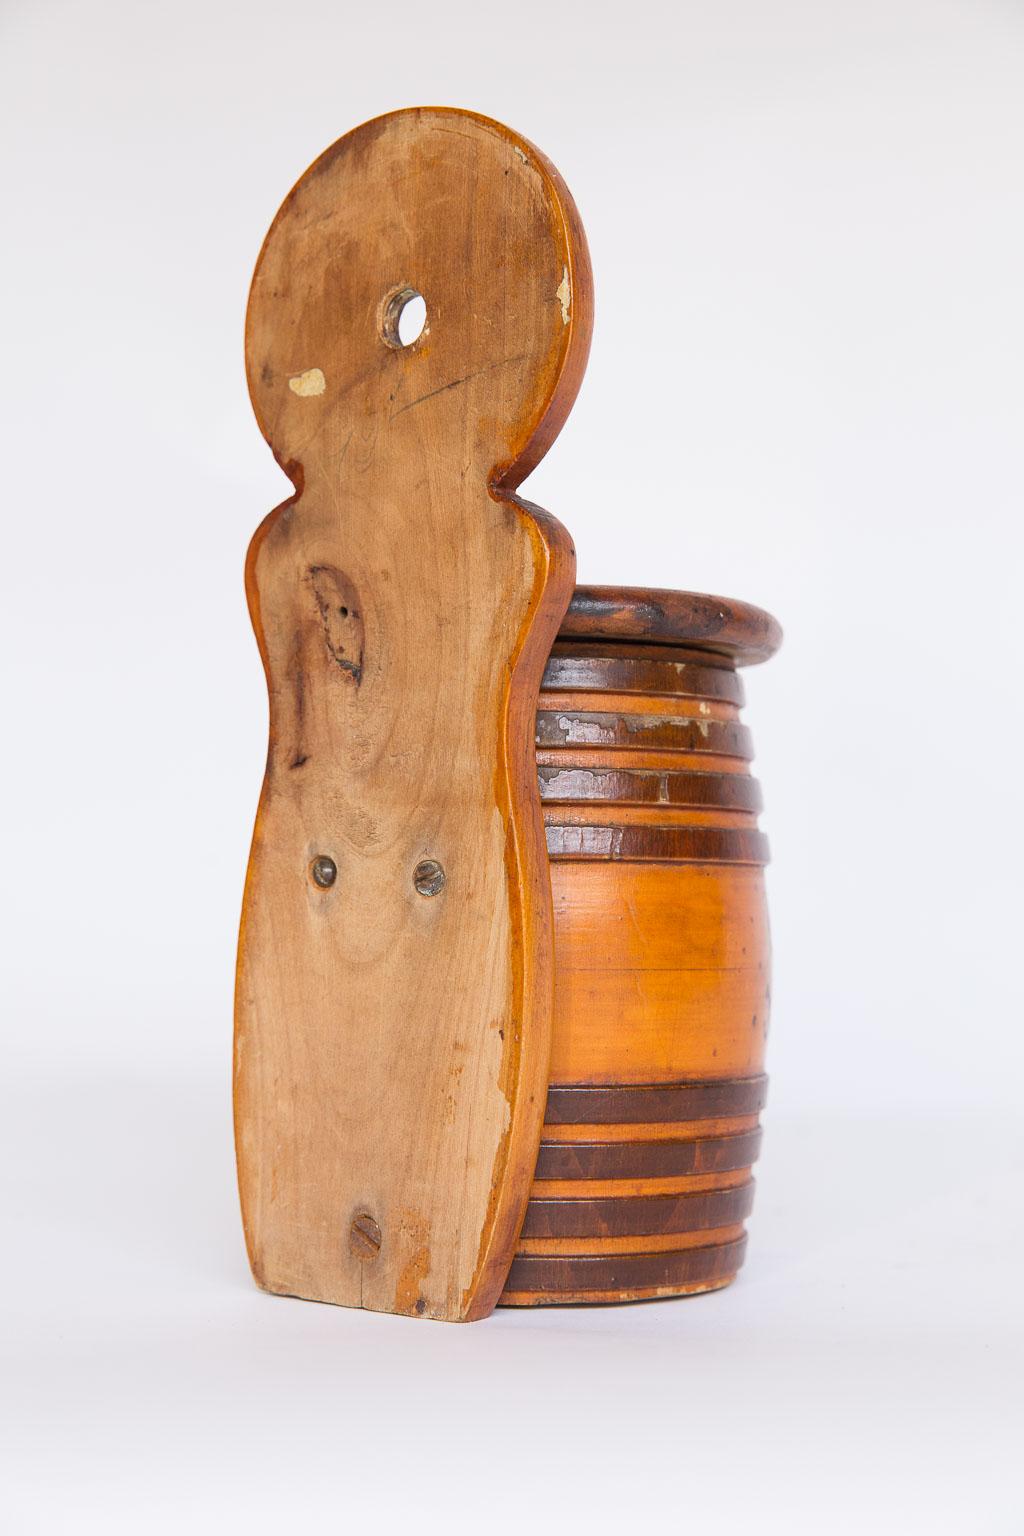 20th Century Turned Mixed Wood Salt Cellar For Sale